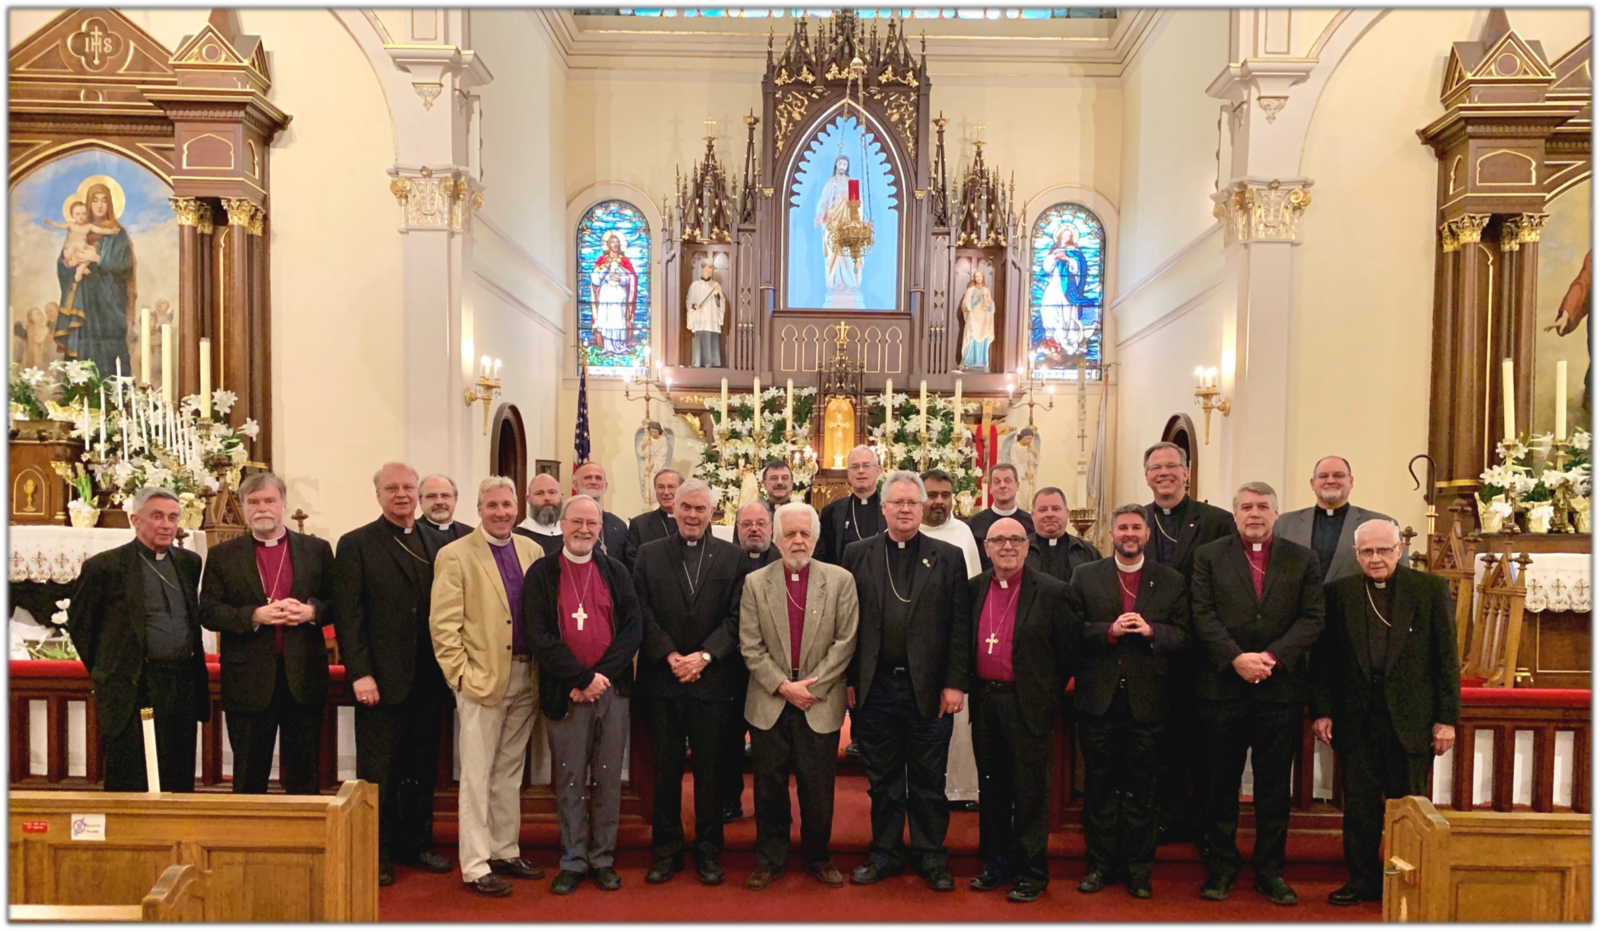 2019 Union of Scranton Convocation for Restoration and Renewal of the Undivided Church